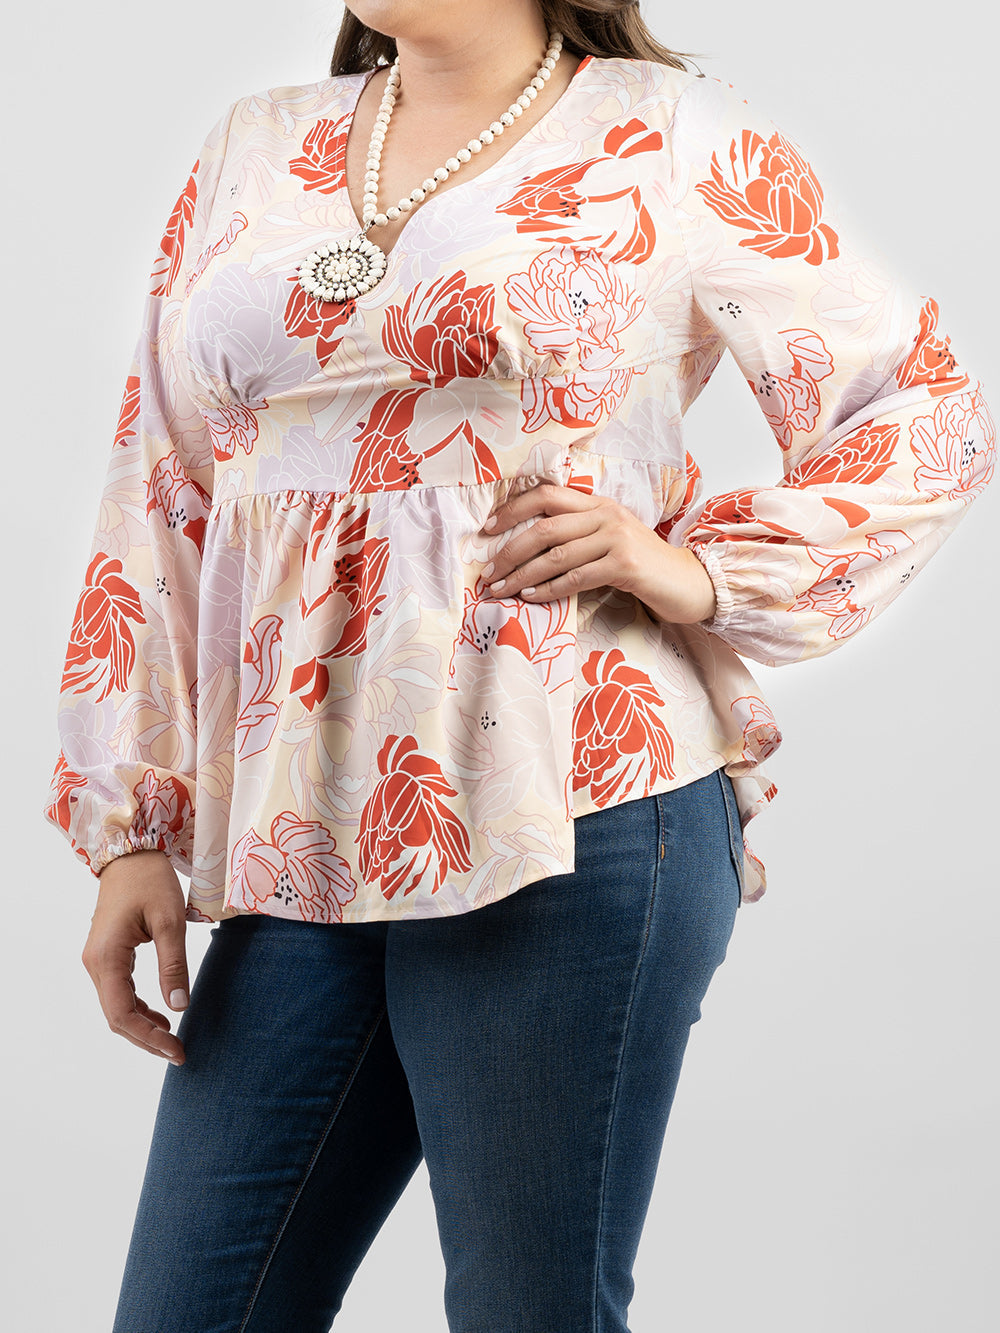 Plus Size Women Floral Print Puff Sleeves High Waist Blouse - Cowgirl Wear